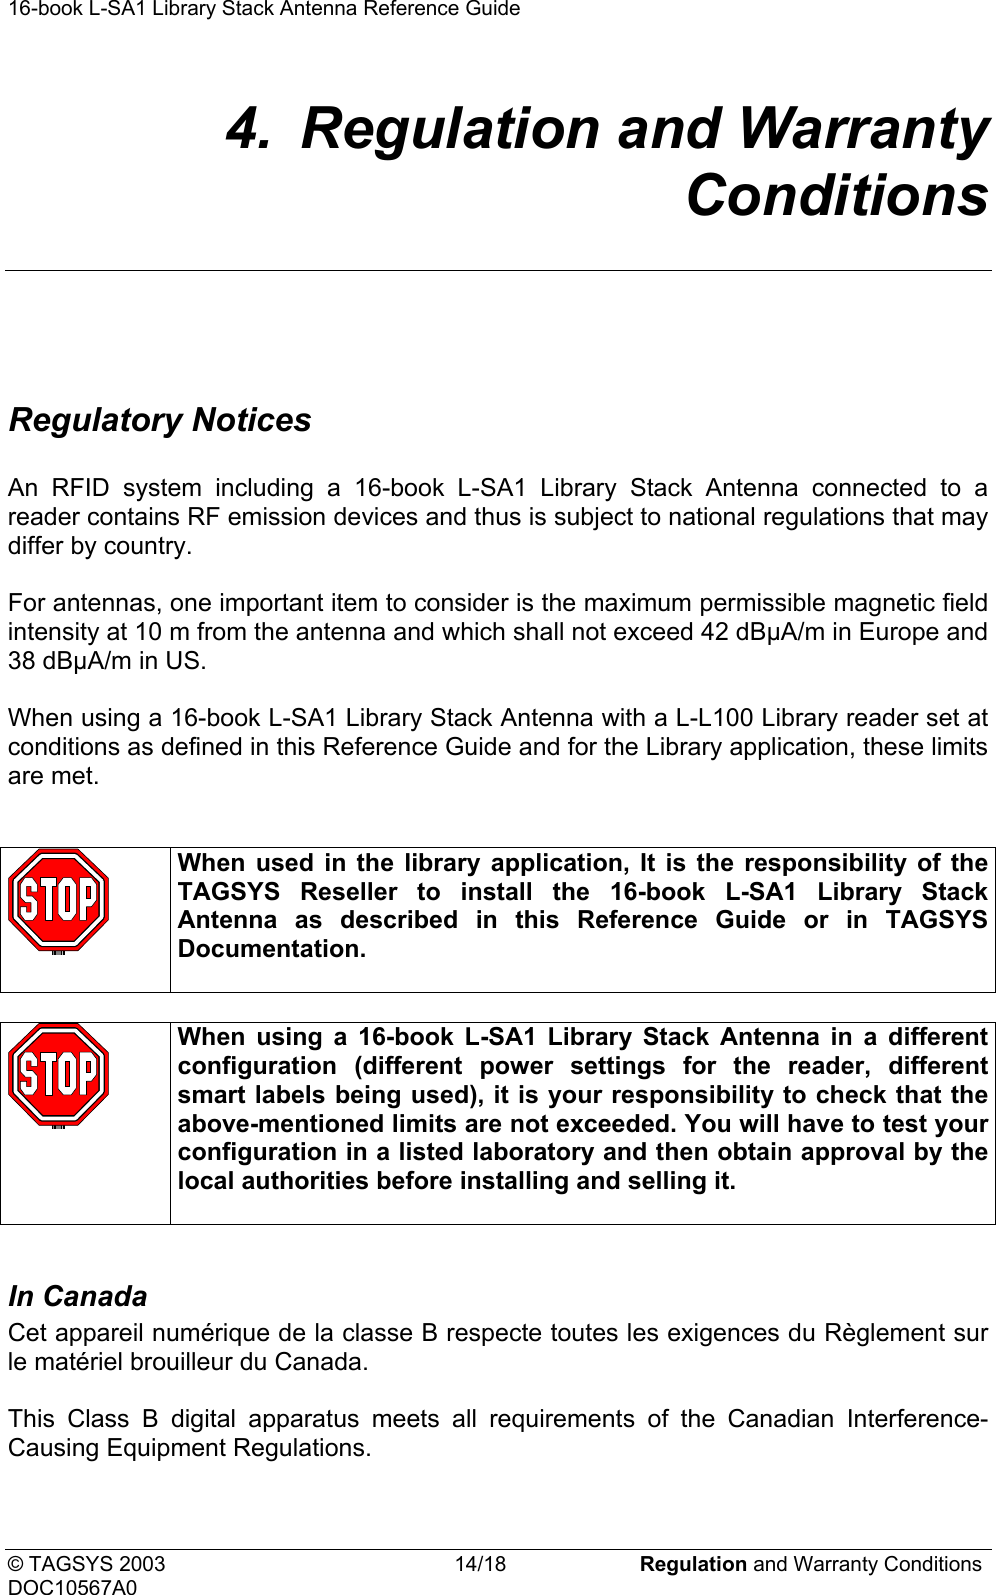 16-book L-SA1 Library Stack Antenna Reference Guide     4.  Regulation and Warranty Conditions   Regulatory Notices  An RFID system including a 16-book L-SA1 Library Stack Antenna connected to a reader contains RF emission devices and thus is subject to national regulations that may differ by country.  For antennas, one important item to consider is the maximum permissible magnetic field intensity at 10 m from the antenna and which shall not exceed 42 dBµA/m in Europe and 38 dBµA/m in US.  When using a 16-book L-SA1 Library Stack Antenna with a L-L100 Library reader set at conditions as defined in this Reference Guide and for the Library application, these limits are met.    When used in the library application, It is the responsibility of the TAGSYS Reseller to install the 16-book L-SA1 Library Stack Antenna as described in this Reference Guide or in TAGSYS Documentation.    When using a 16-book L-SA1 Library Stack Antenna in a different configuration (different power settings for the reader, different smart labels being used), it is your responsibility to check that the above-mentioned limits are not exceeded. You will have to test your configuration in a listed laboratory and then obtain approval by the local authorities before installing and selling it.   In Canada   Cet appareil numérique de la classe B respecte toutes les exigences du Règlement sur le matériel brouilleur du Canada.  This Class B digital apparatus meets all requirements of the Canadian Interference-Causing Equipment Regulations.  © TAGSYS 2003  14/18  Regulation and Warranty Conditions DOC10567A0 